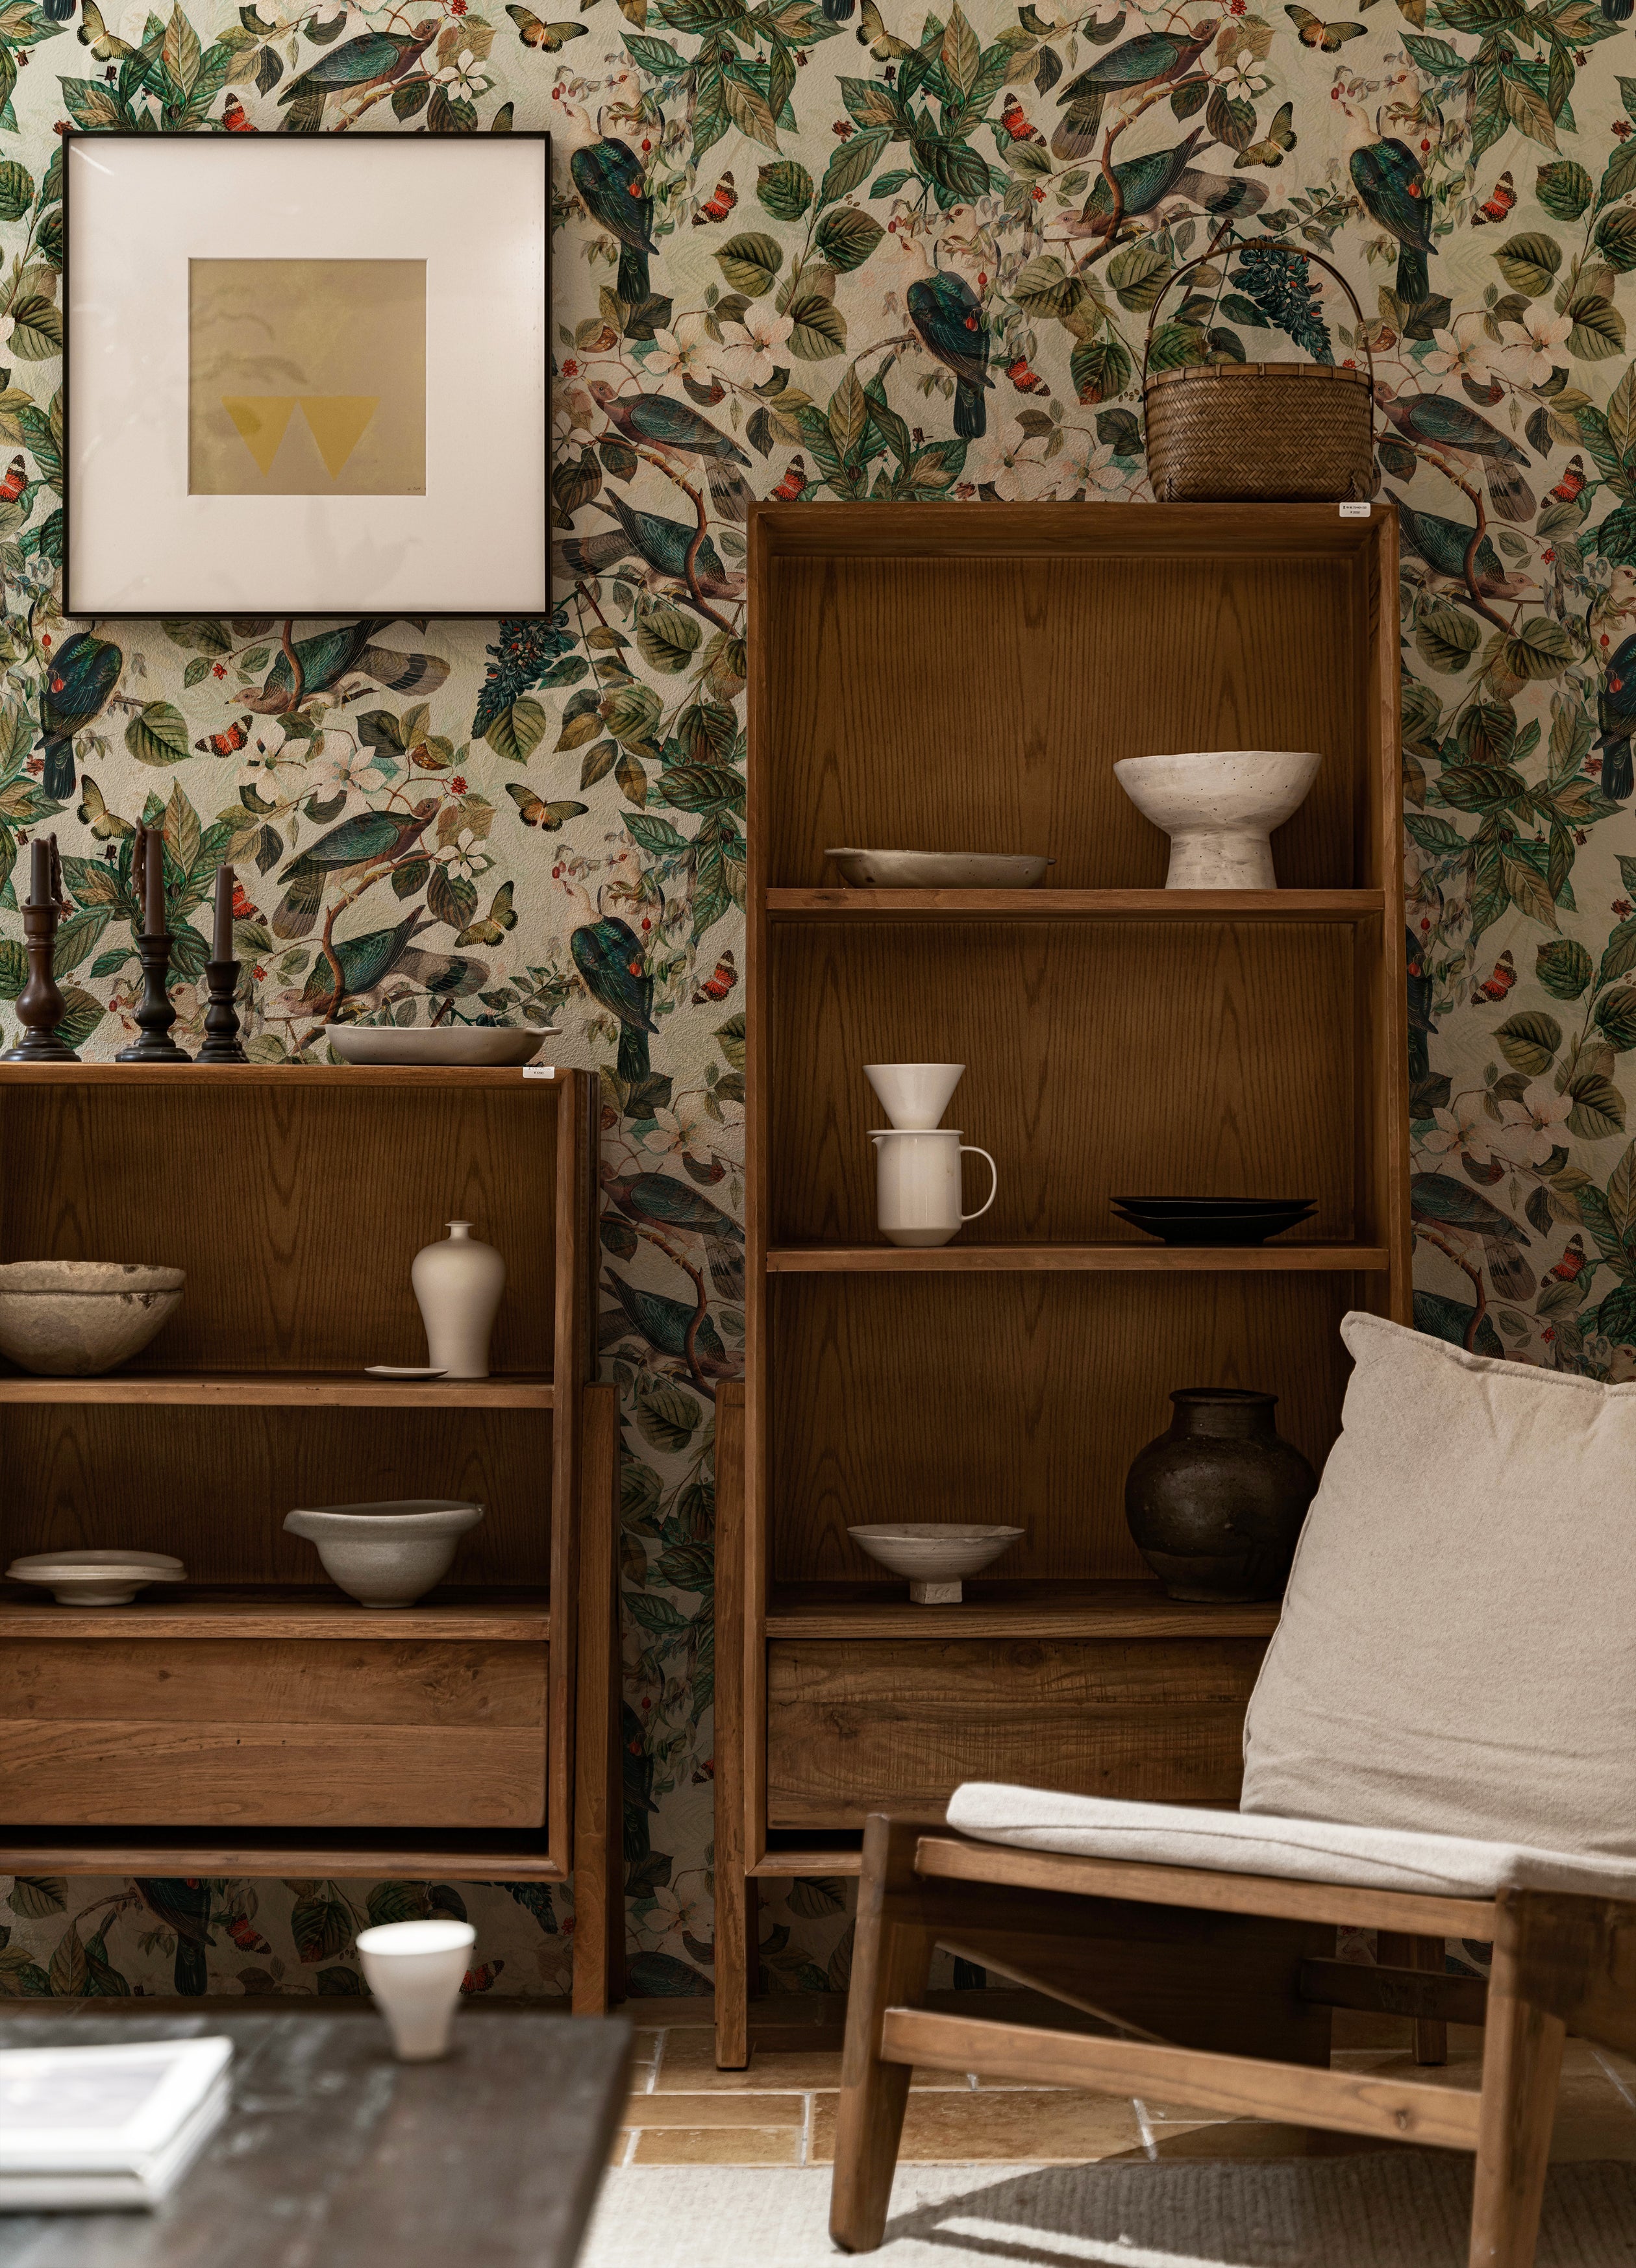 Cozy interior scene featuring Spring Pigeon Wallpaper with a rich botanical design of green leaves, white blossoms, and vibrant pigeons. A wooden bookshelf filled with ceramic pottery adds a rustic touch against the lively wallpaper background.